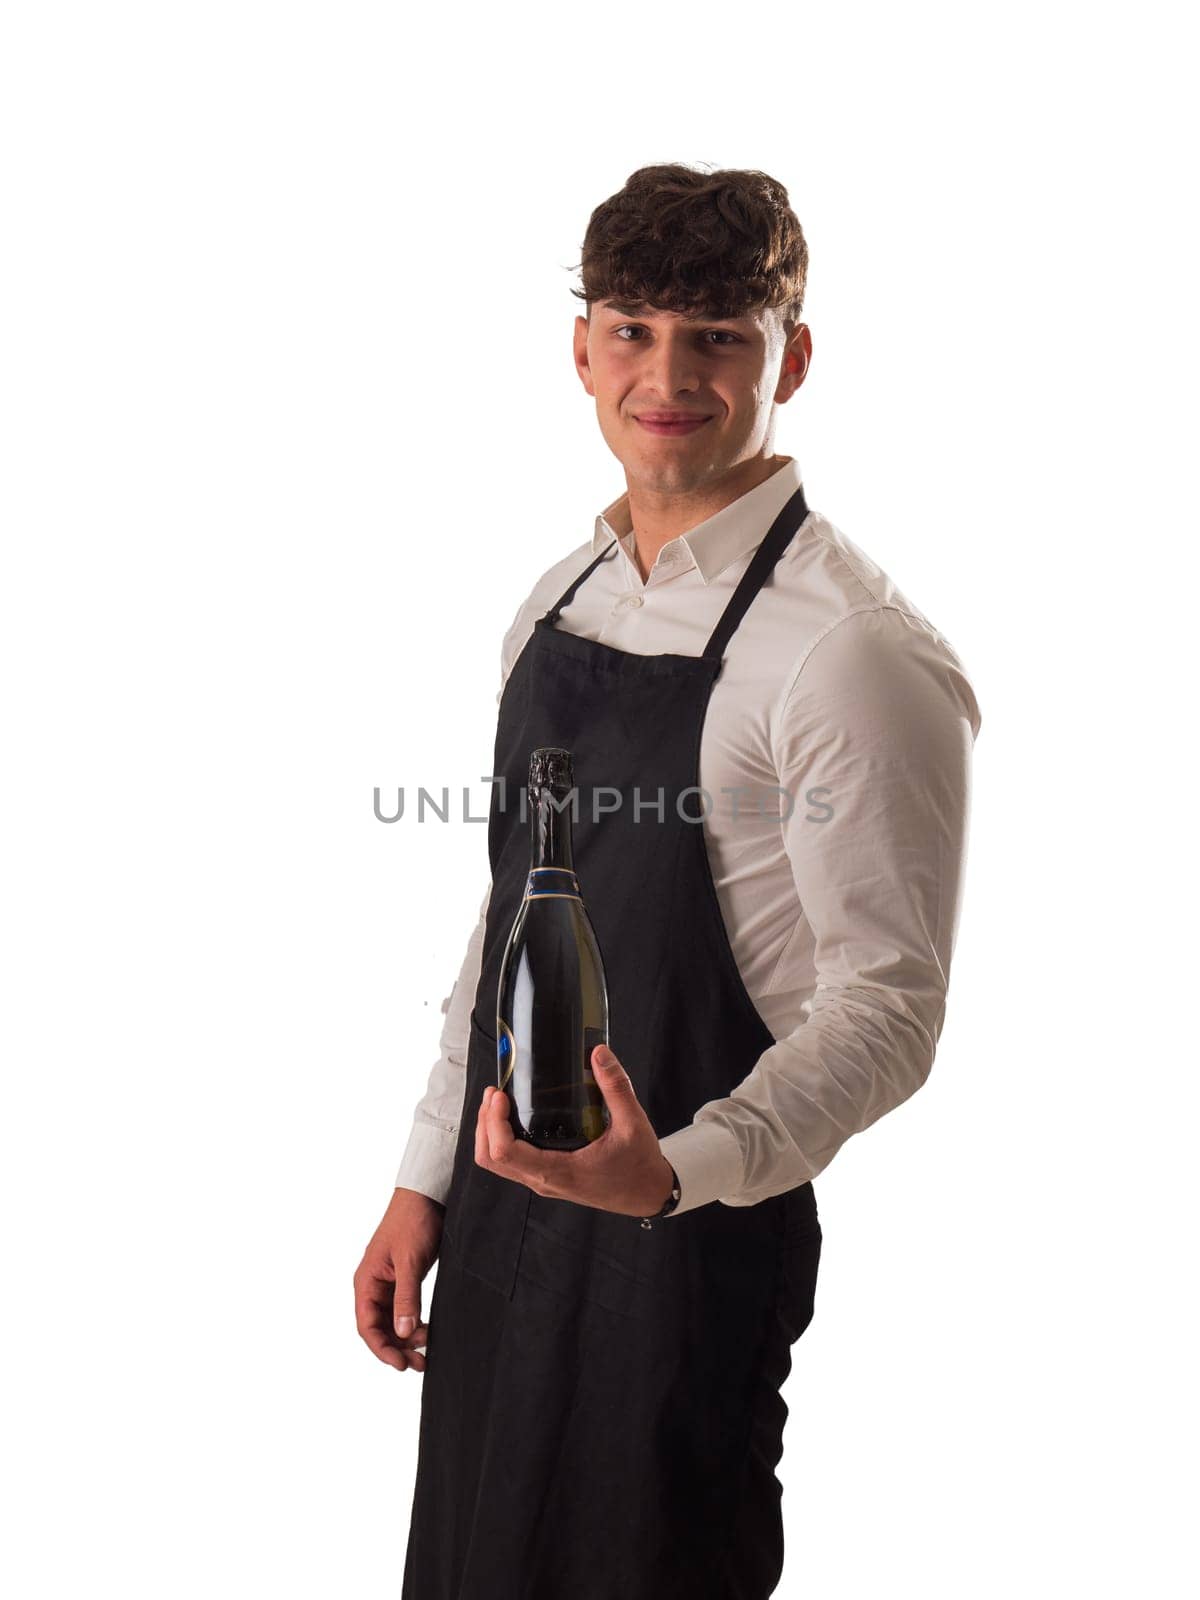 A man in an apron holding a bottle of wine